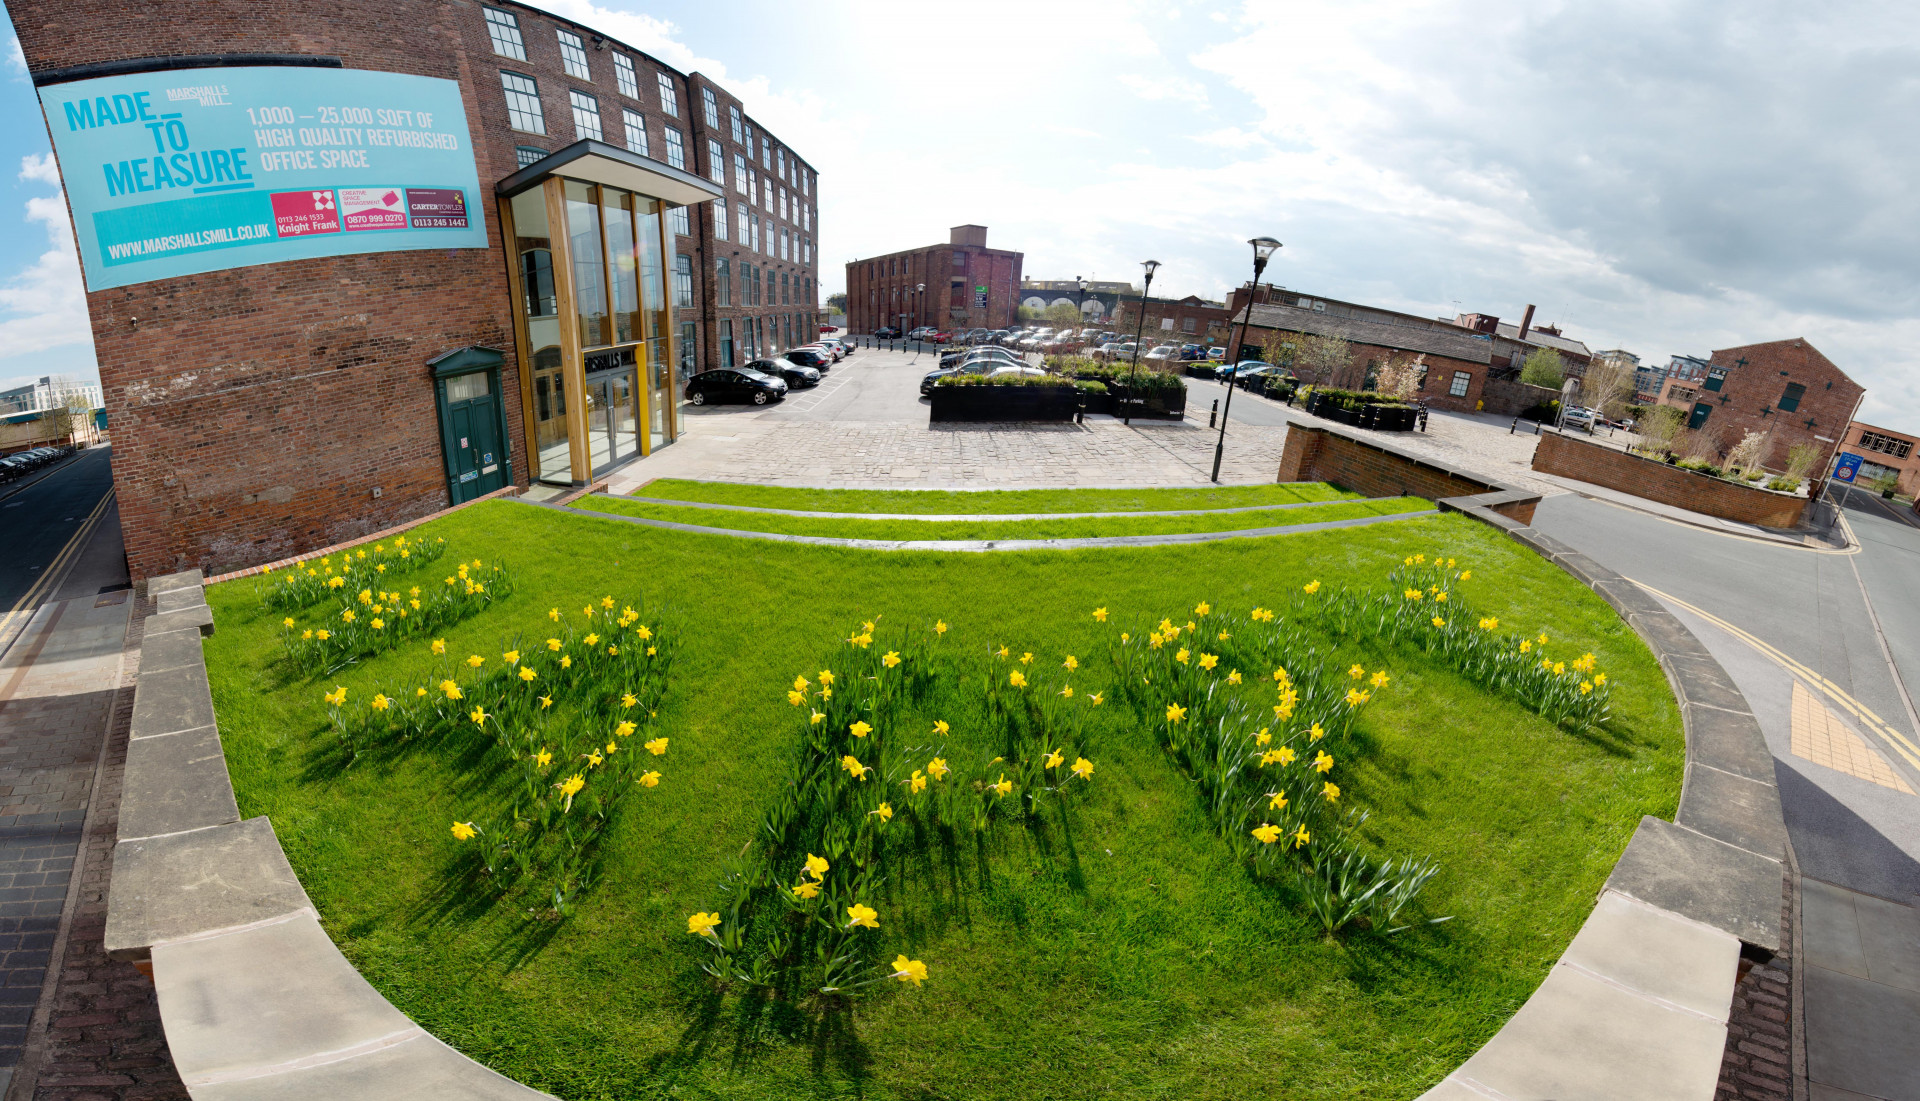 Fisheye-esque Panorama of specially planted daffodils spelling out 